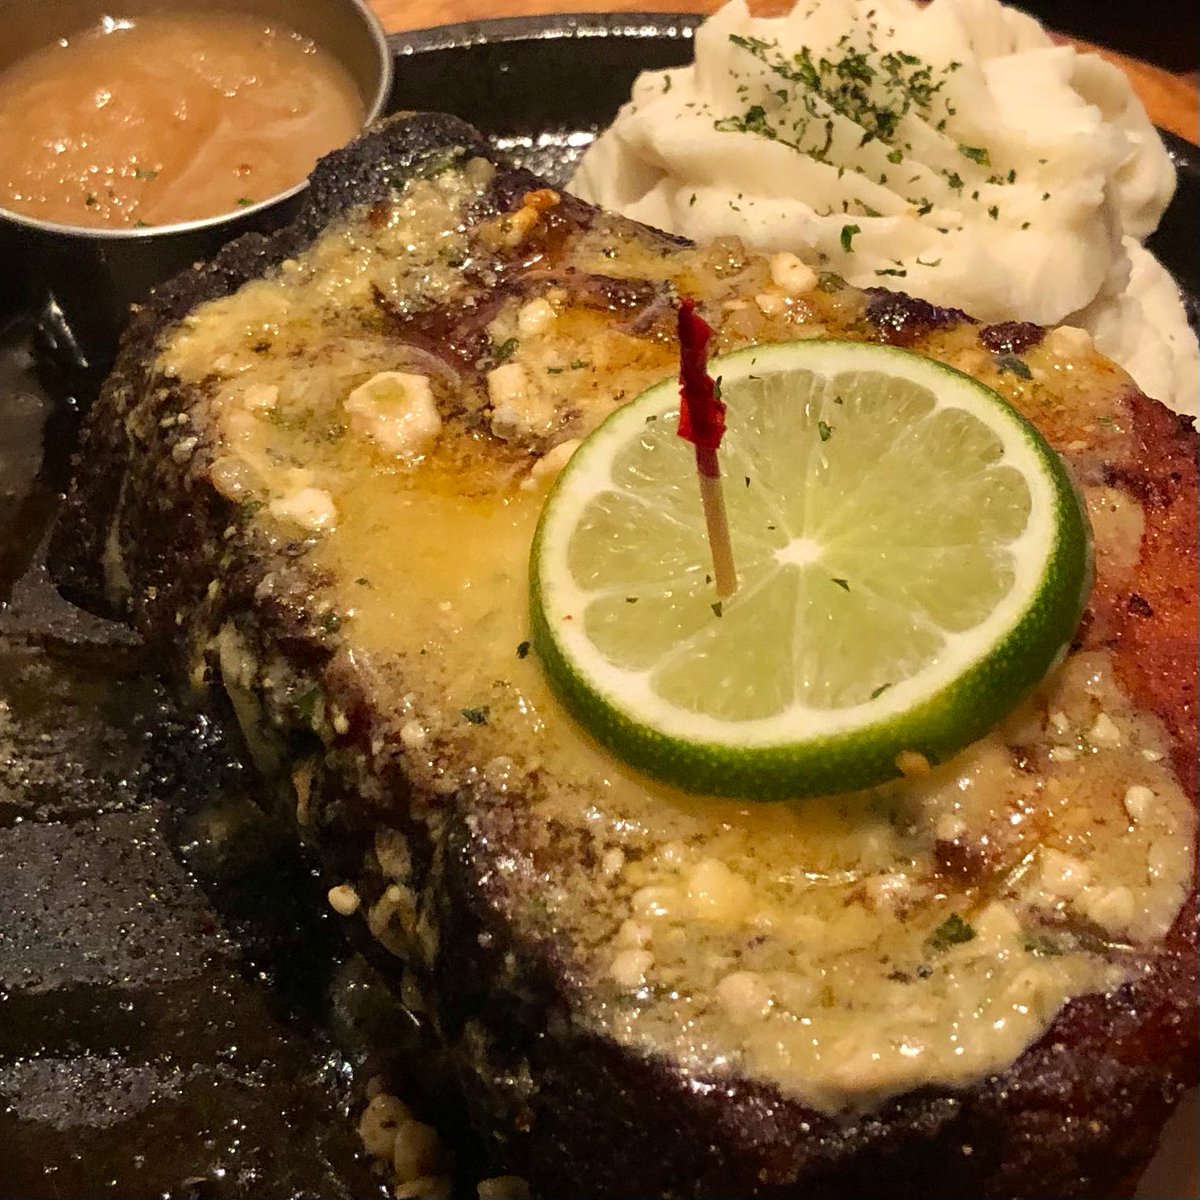 I’m In A Lunch Coma.😴

OMG. This is the LUNCH portion of Perry’s famous pork chop. Can’t describe the deliciousness. They give a recipe card w/boxed leftovers, so I’ll be enjoying for at least another day. Meanwhile, not much else getting done today. 🤭perryssteakhouse.com/famousporkchop/